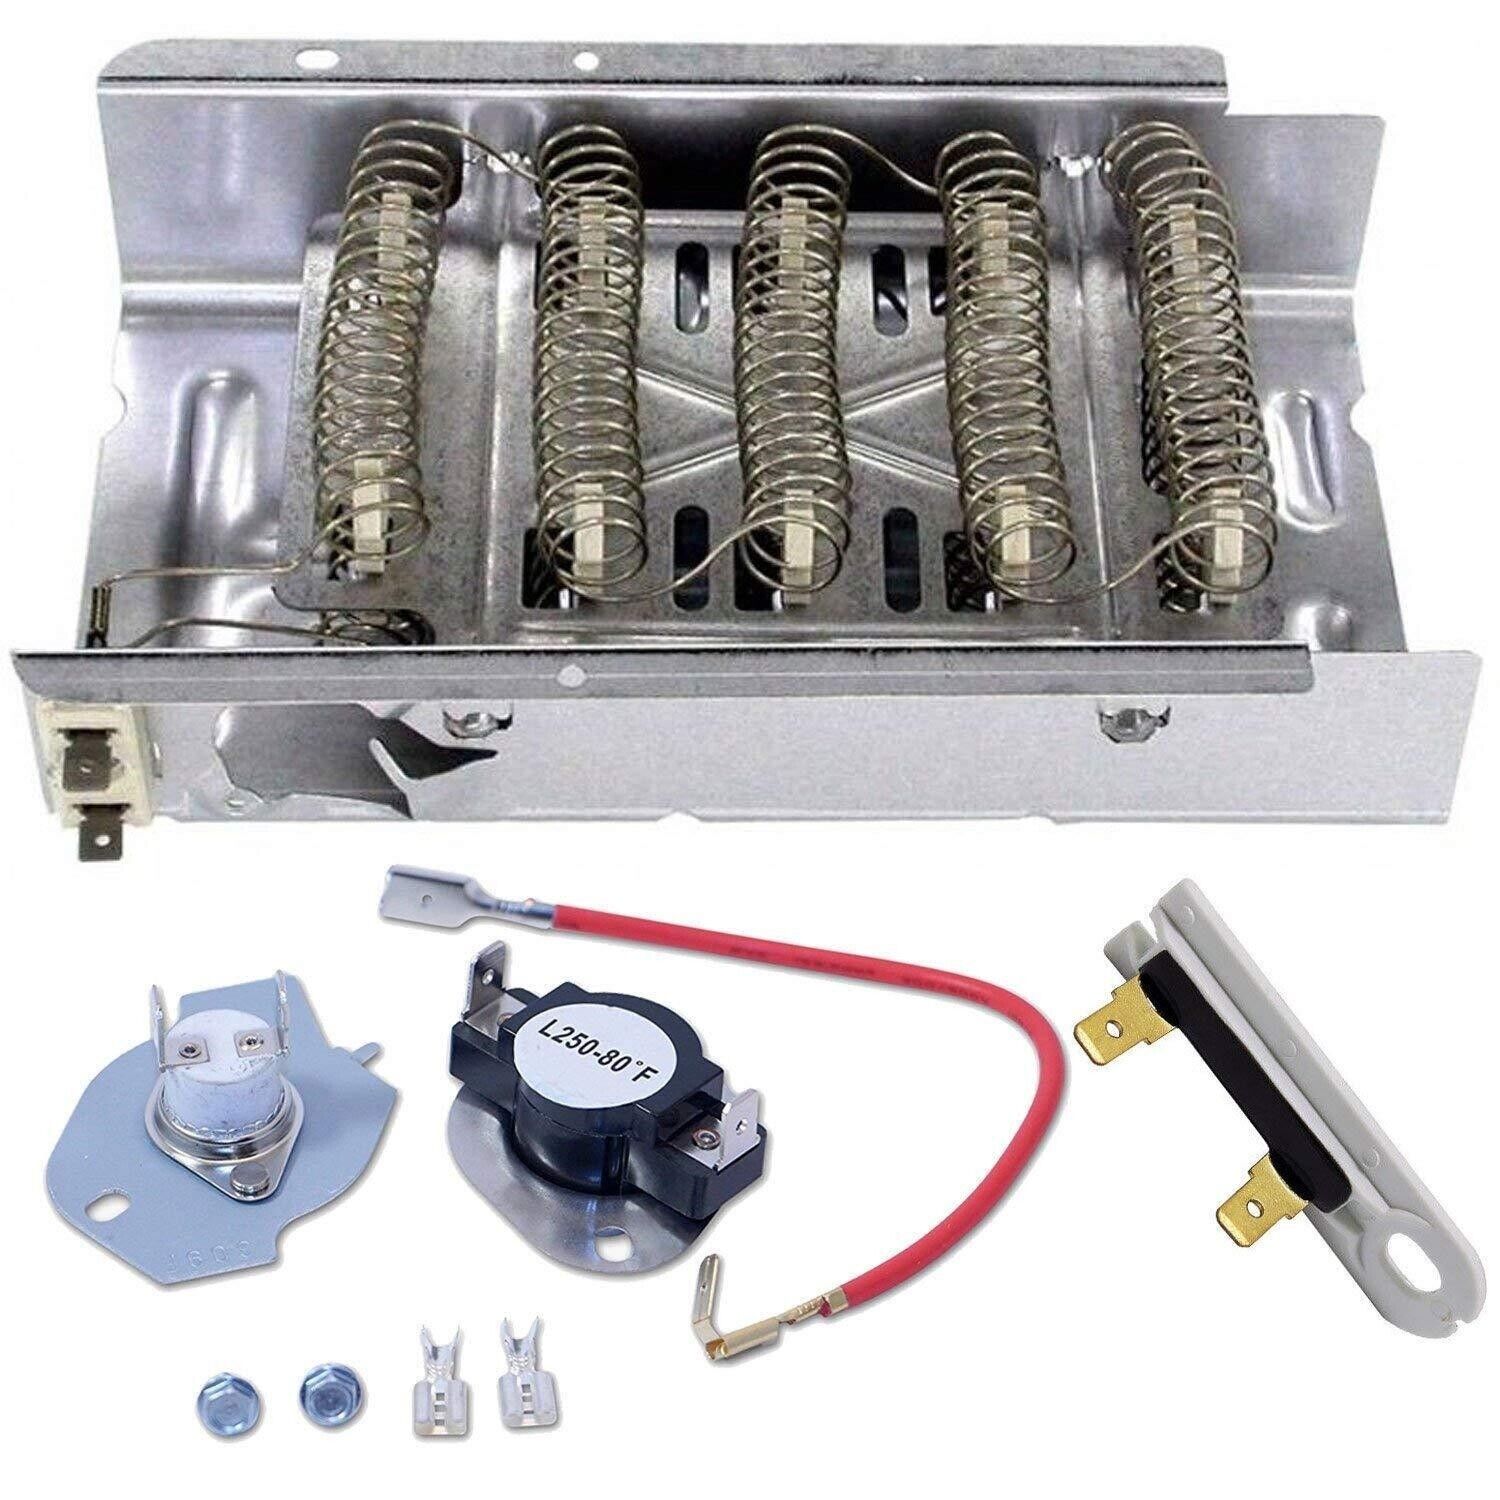 Electric Heating Element Thermostat Kit Compatible Whirlpool Dryer 11060022010